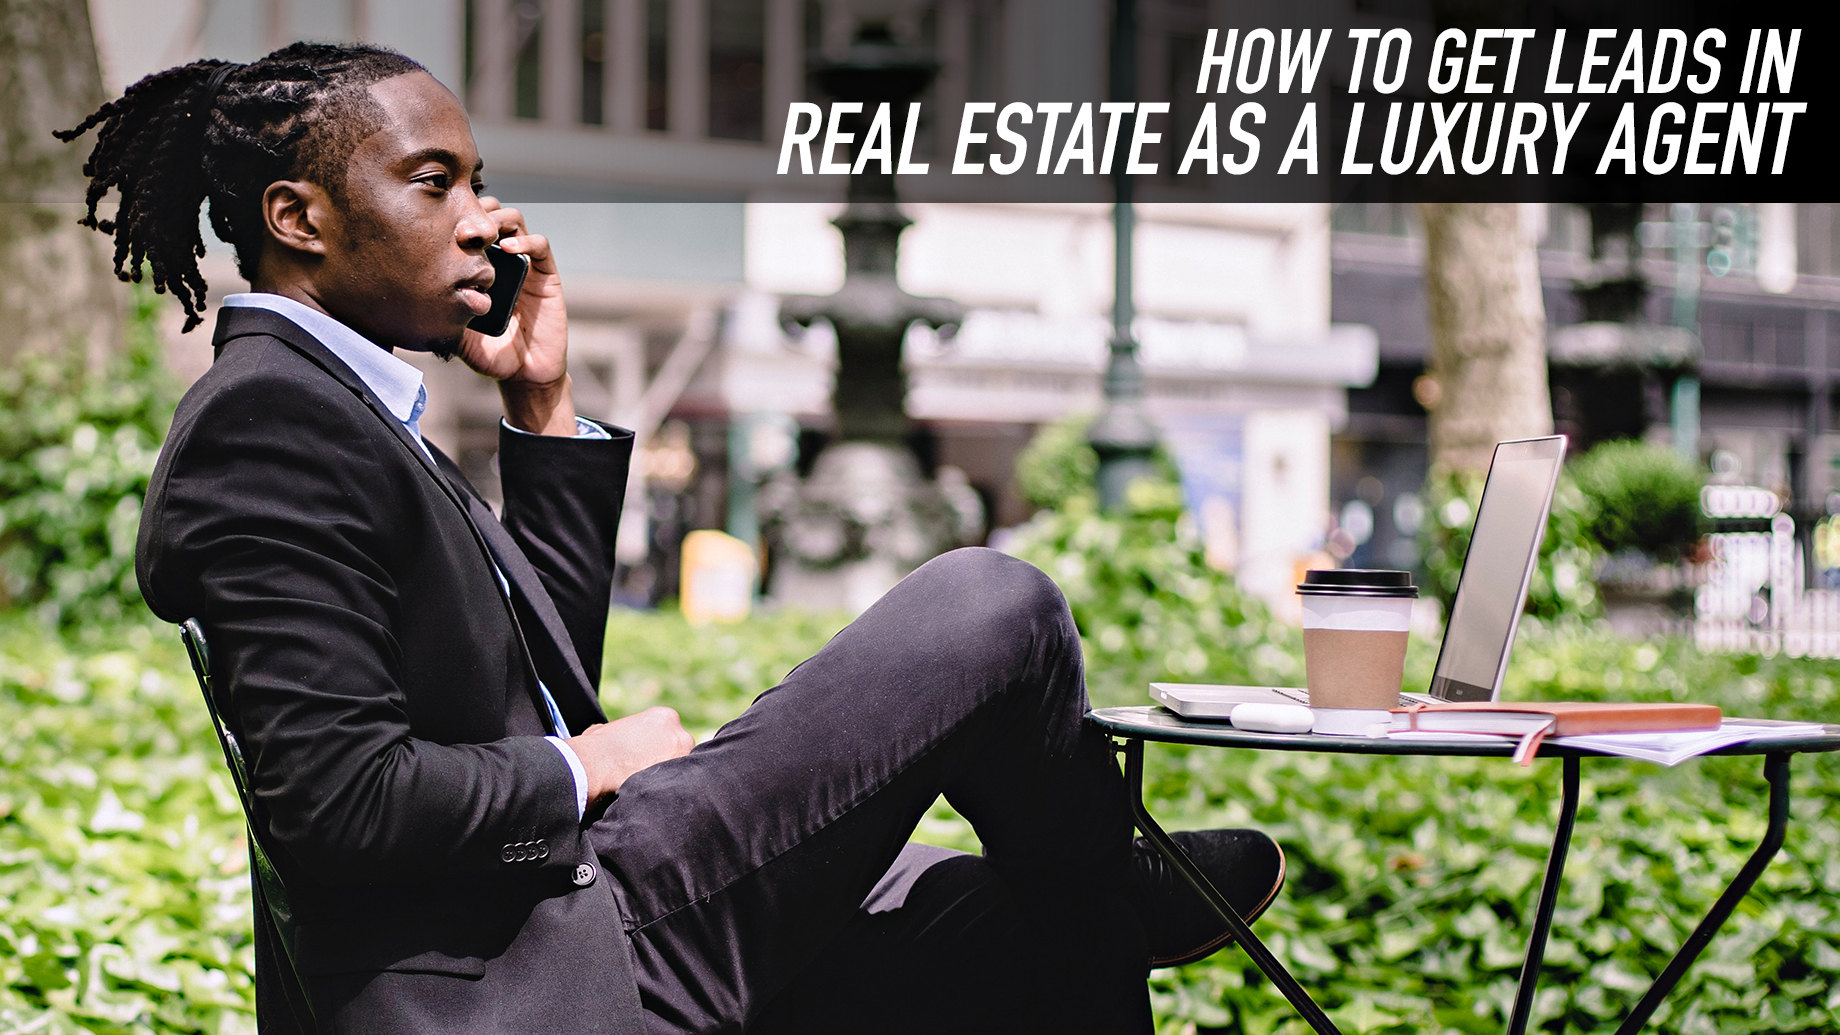 How to Get Leads in Real Estate as a Luxury Agent